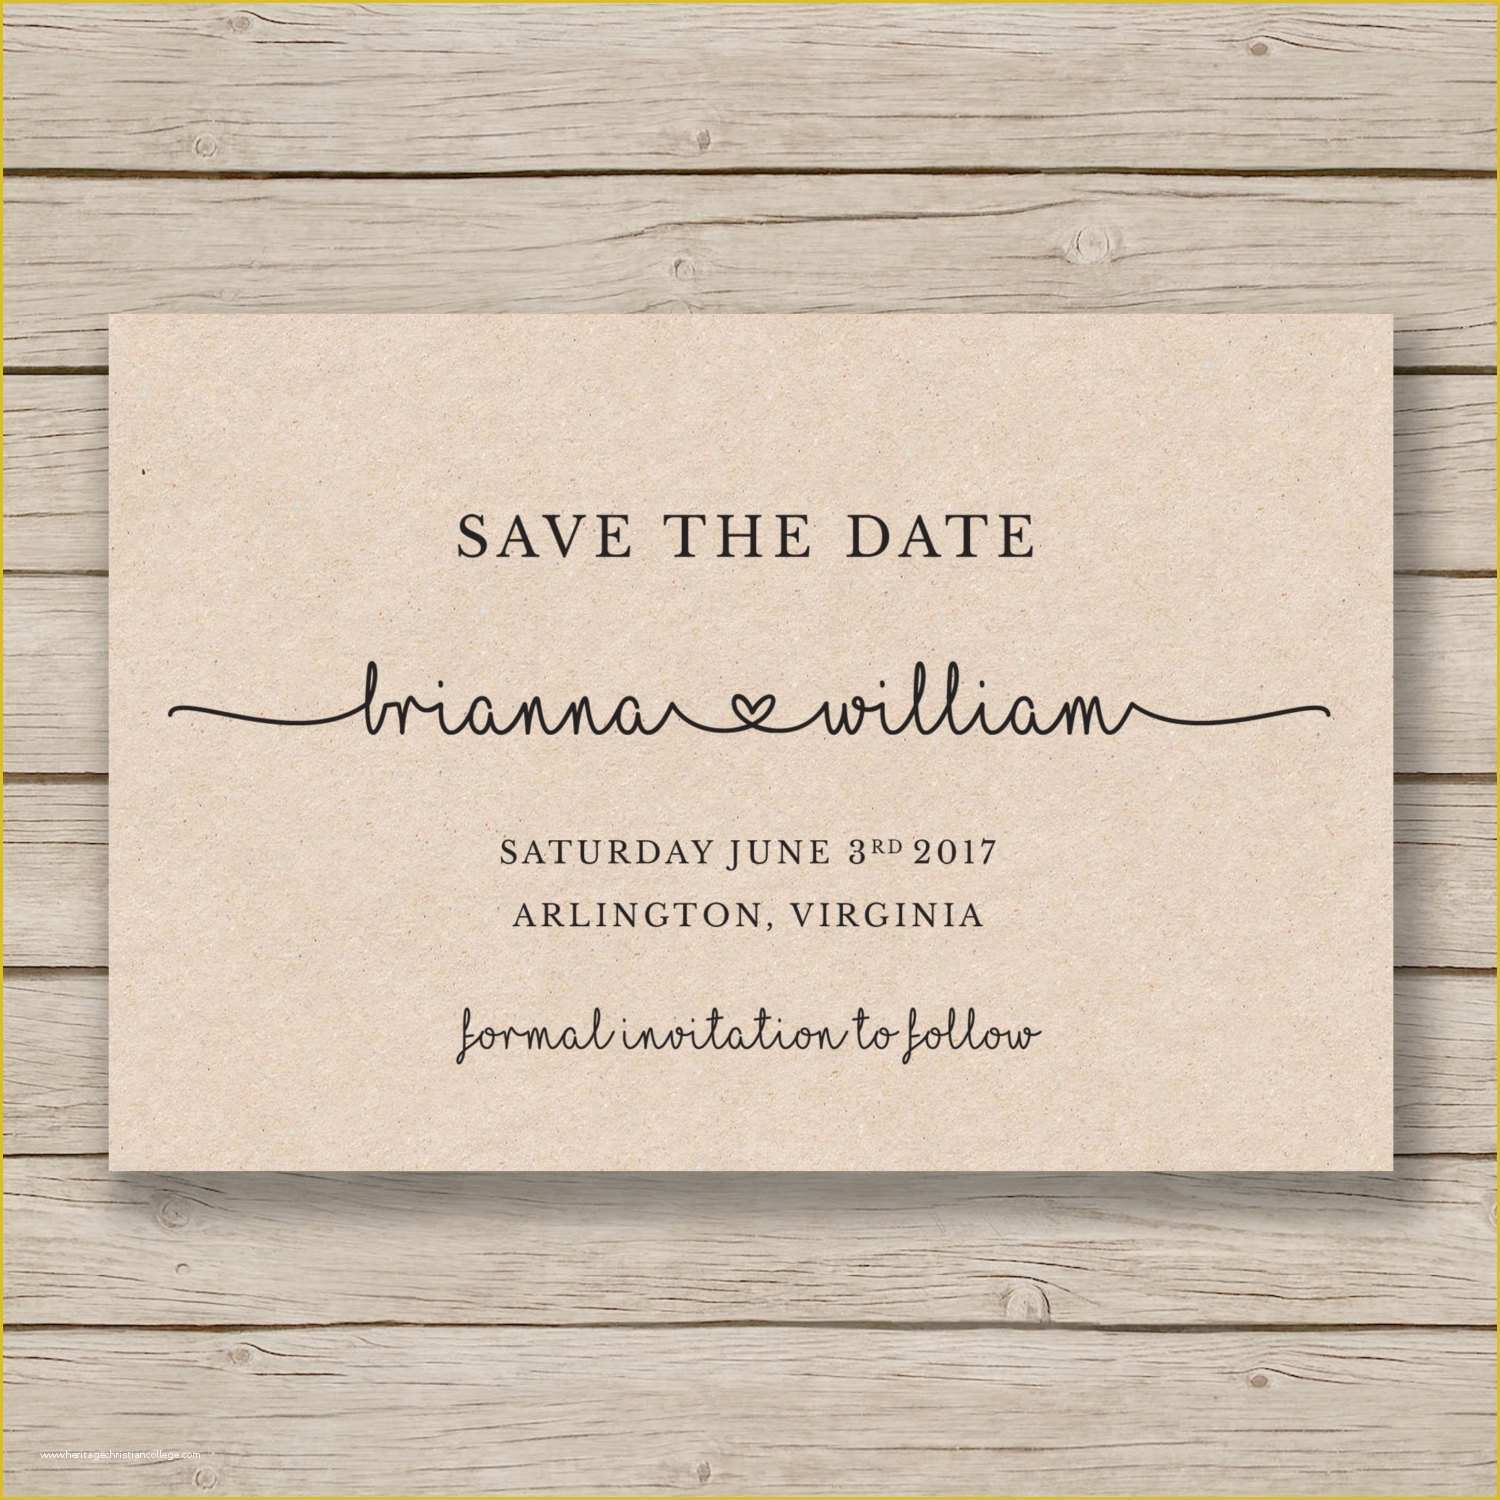 Free Save the Date Templates Word Of Save the Date Printable Template Editable by You In Word